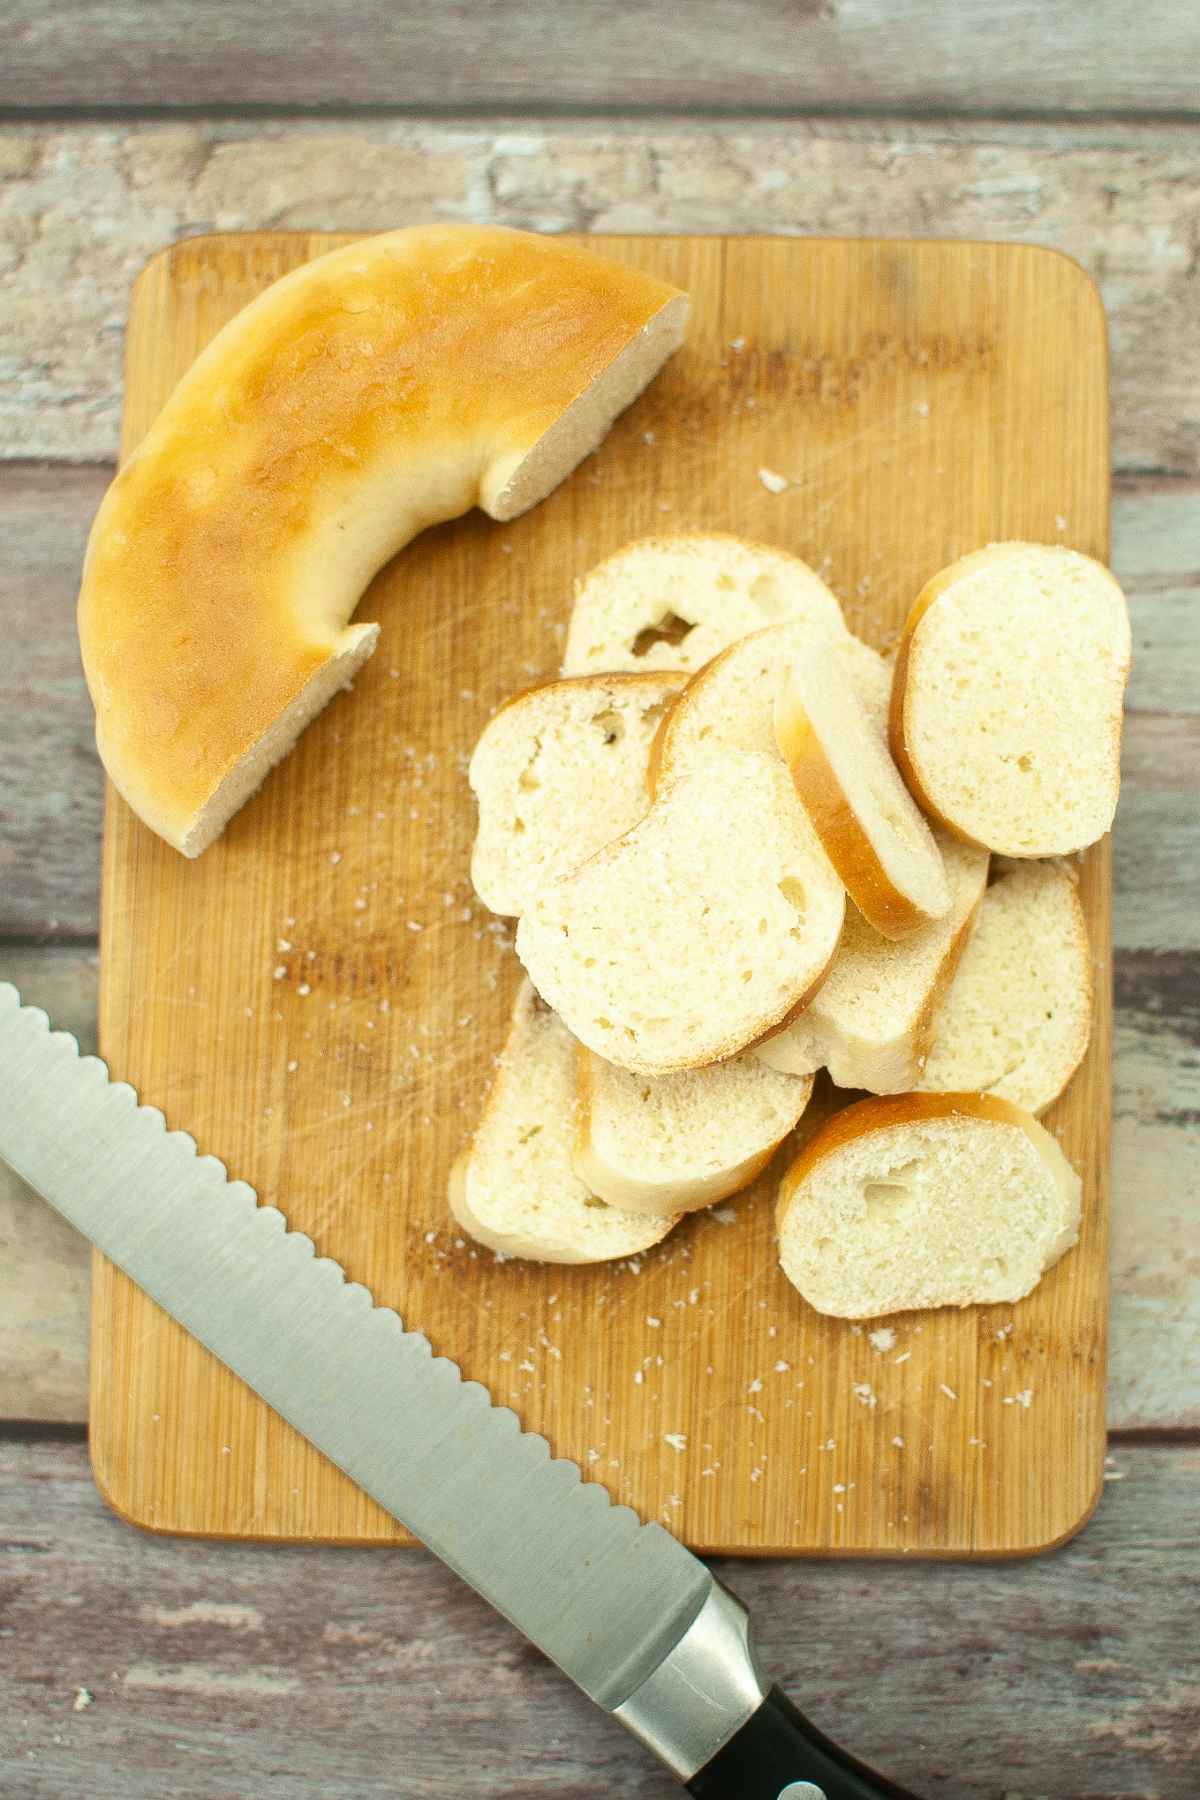 Unsliced bakery bagel on cutting board with chip slices cut from the bagel.